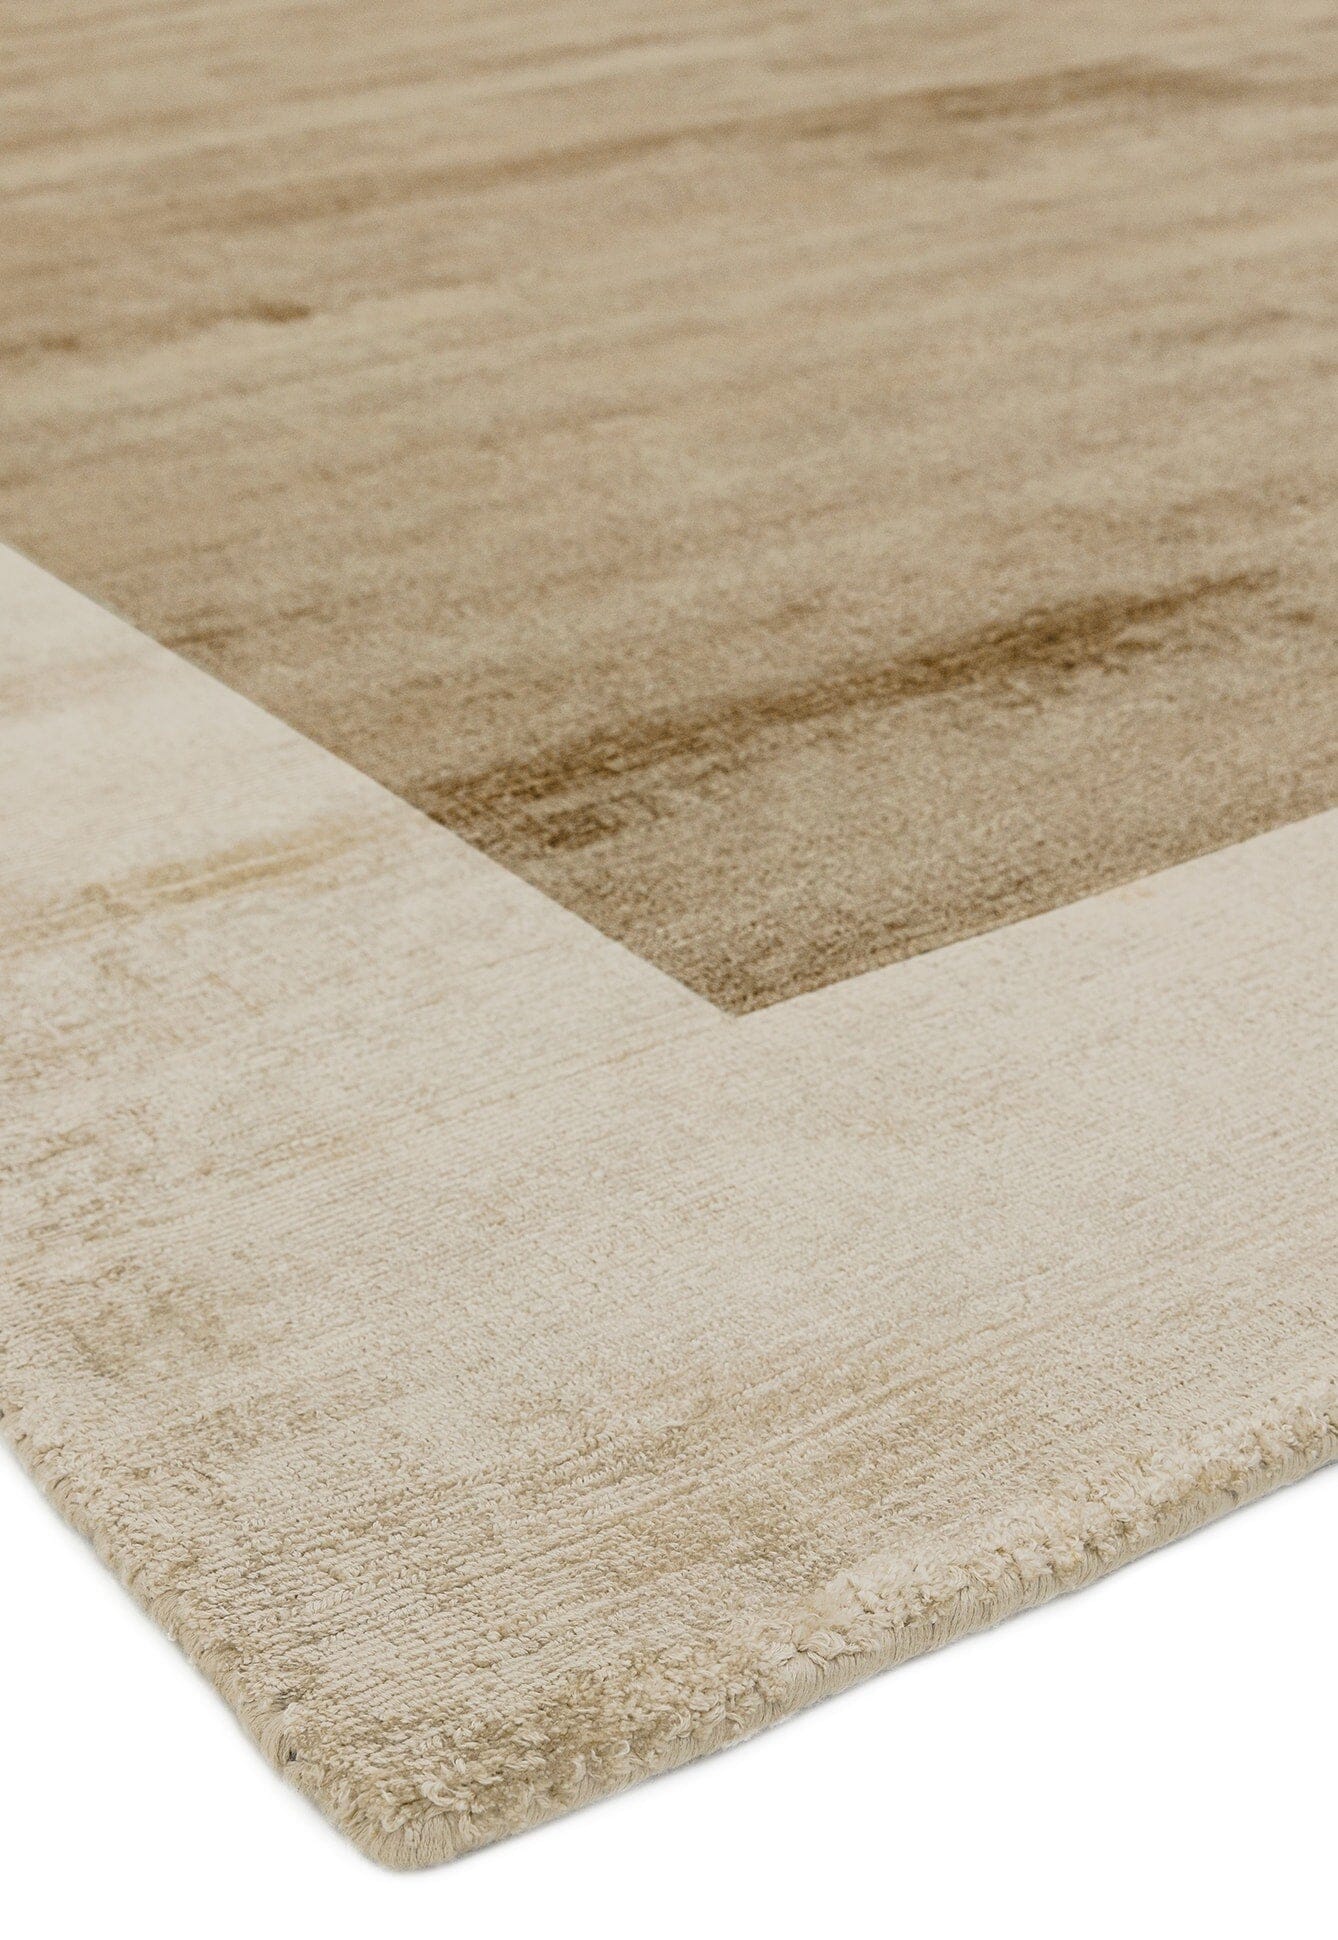  Asiatic Carpets-Asiatic Carpets Blade Hand Woven Rug Putty Champagne - 200 x 200cm-Beige, Natural 917 